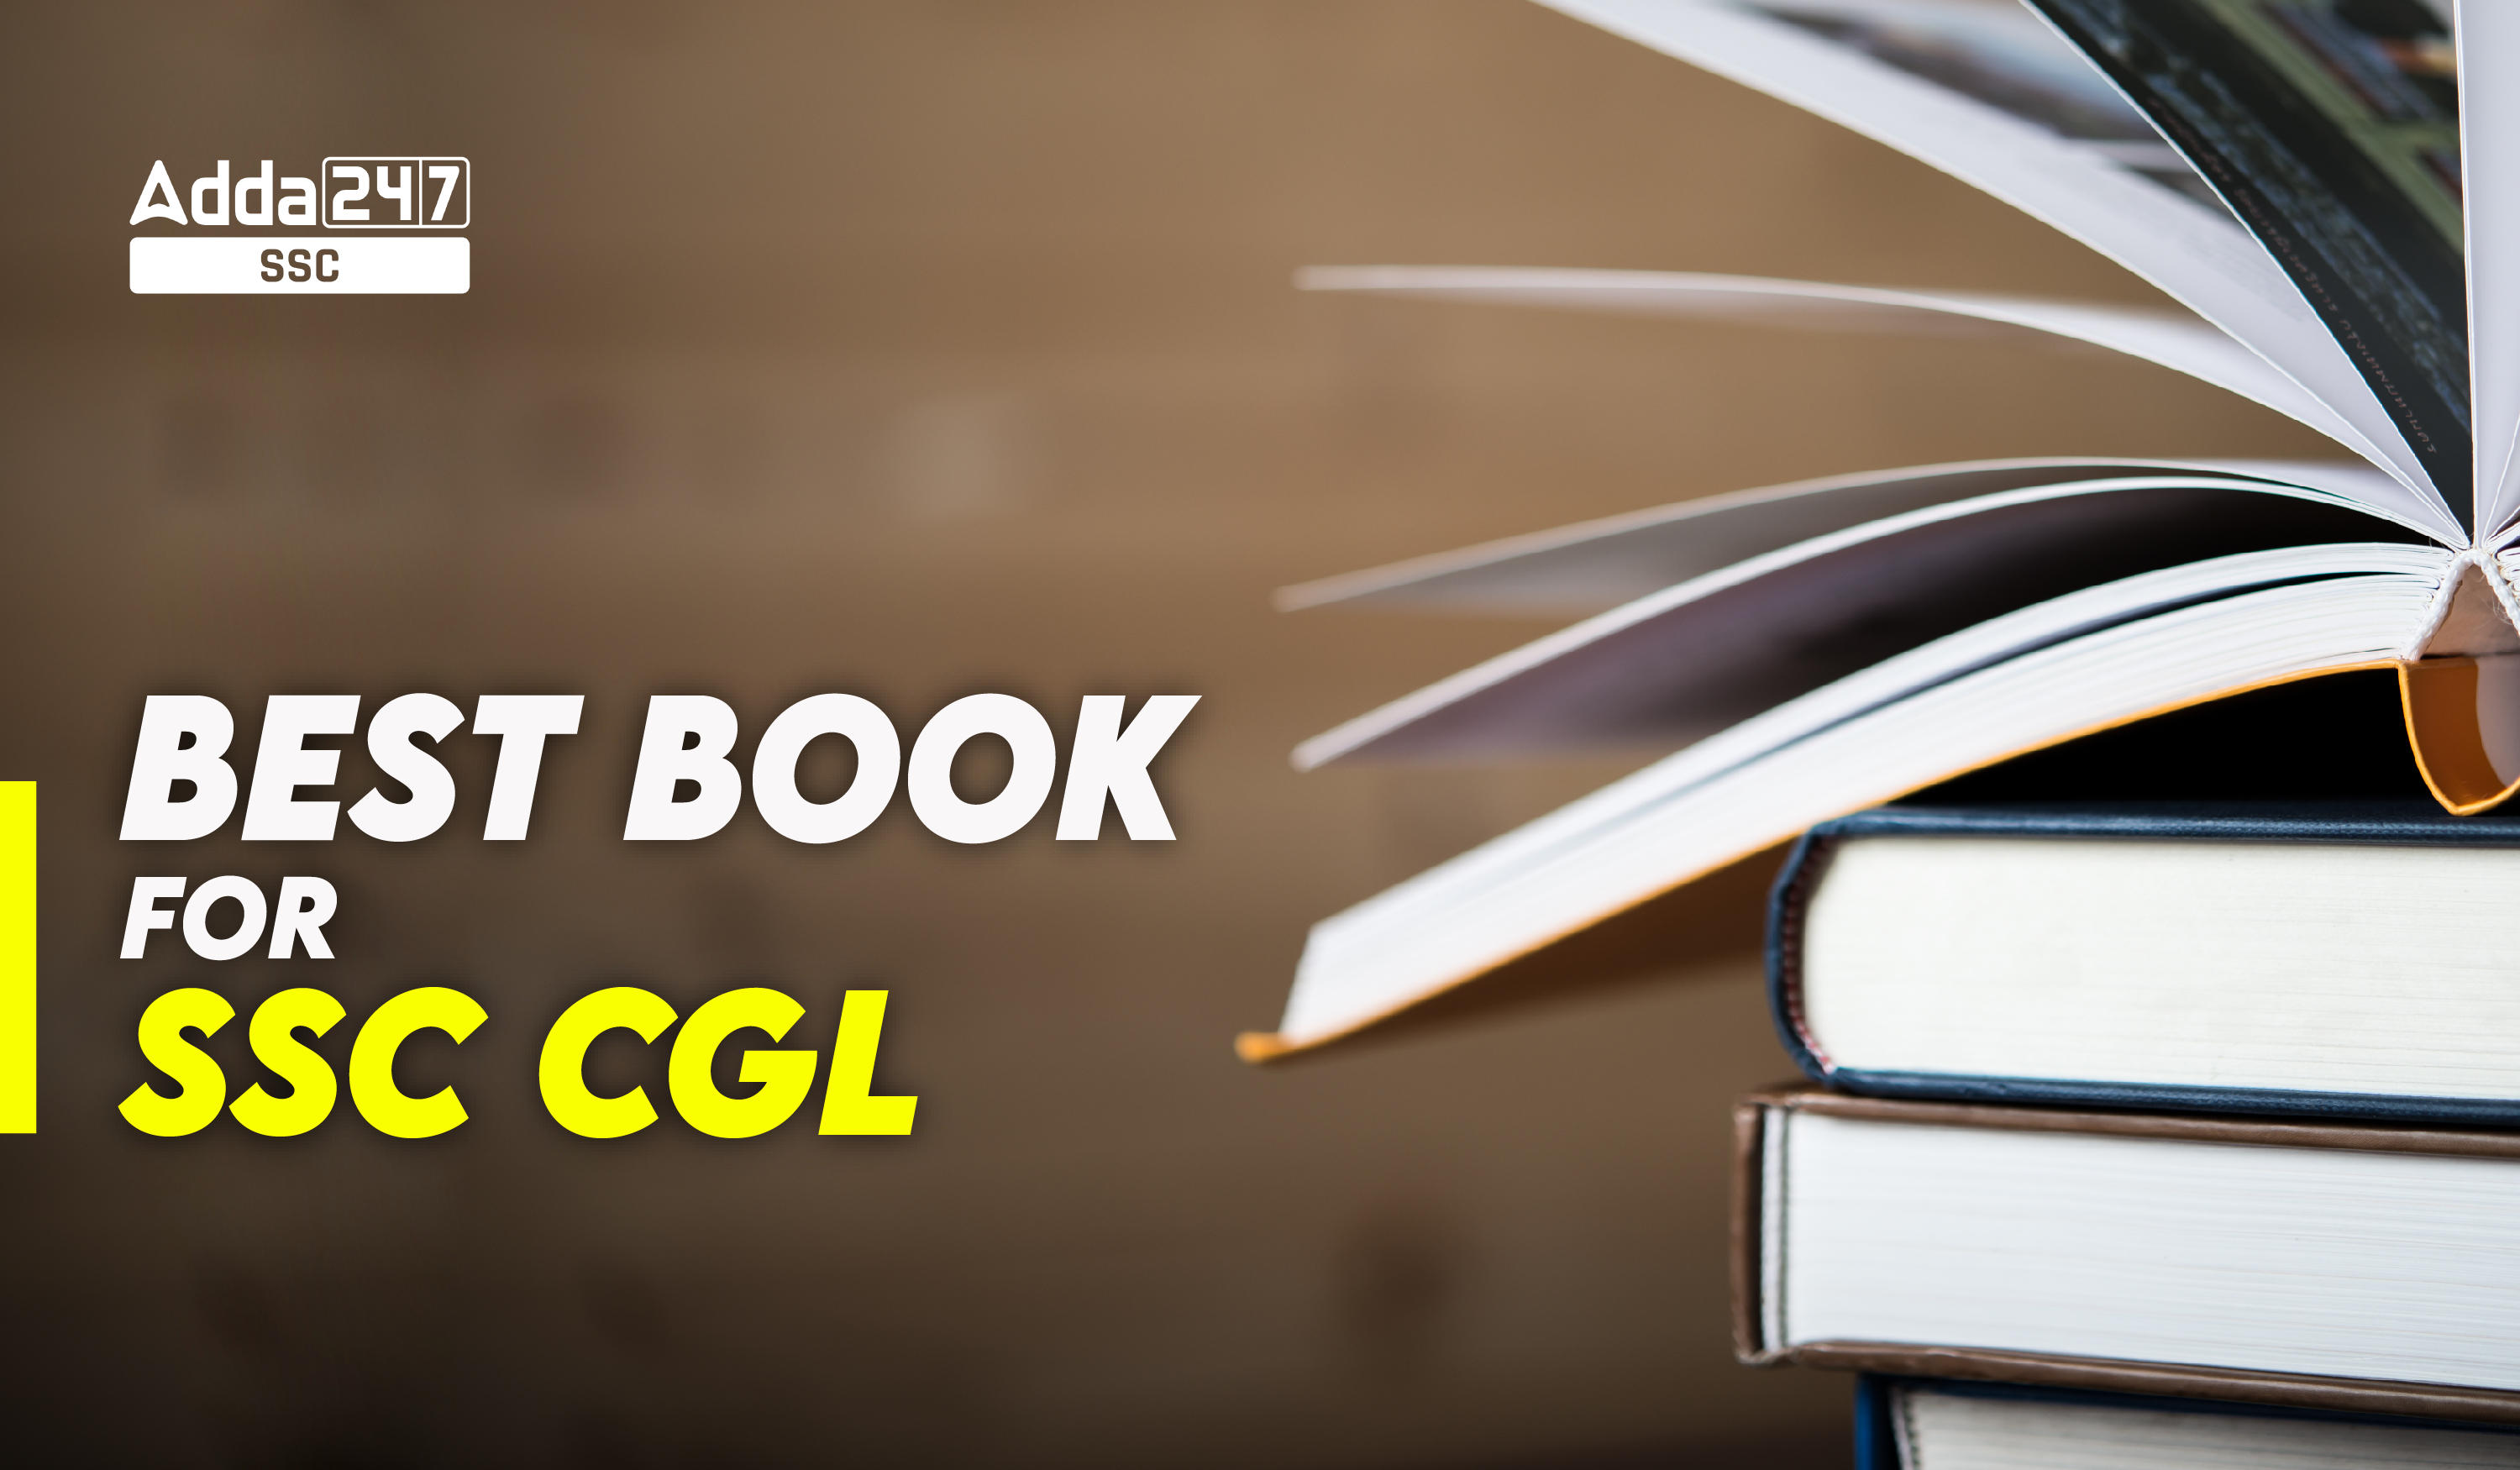 Best Books for SSC CGL, List and Benefits